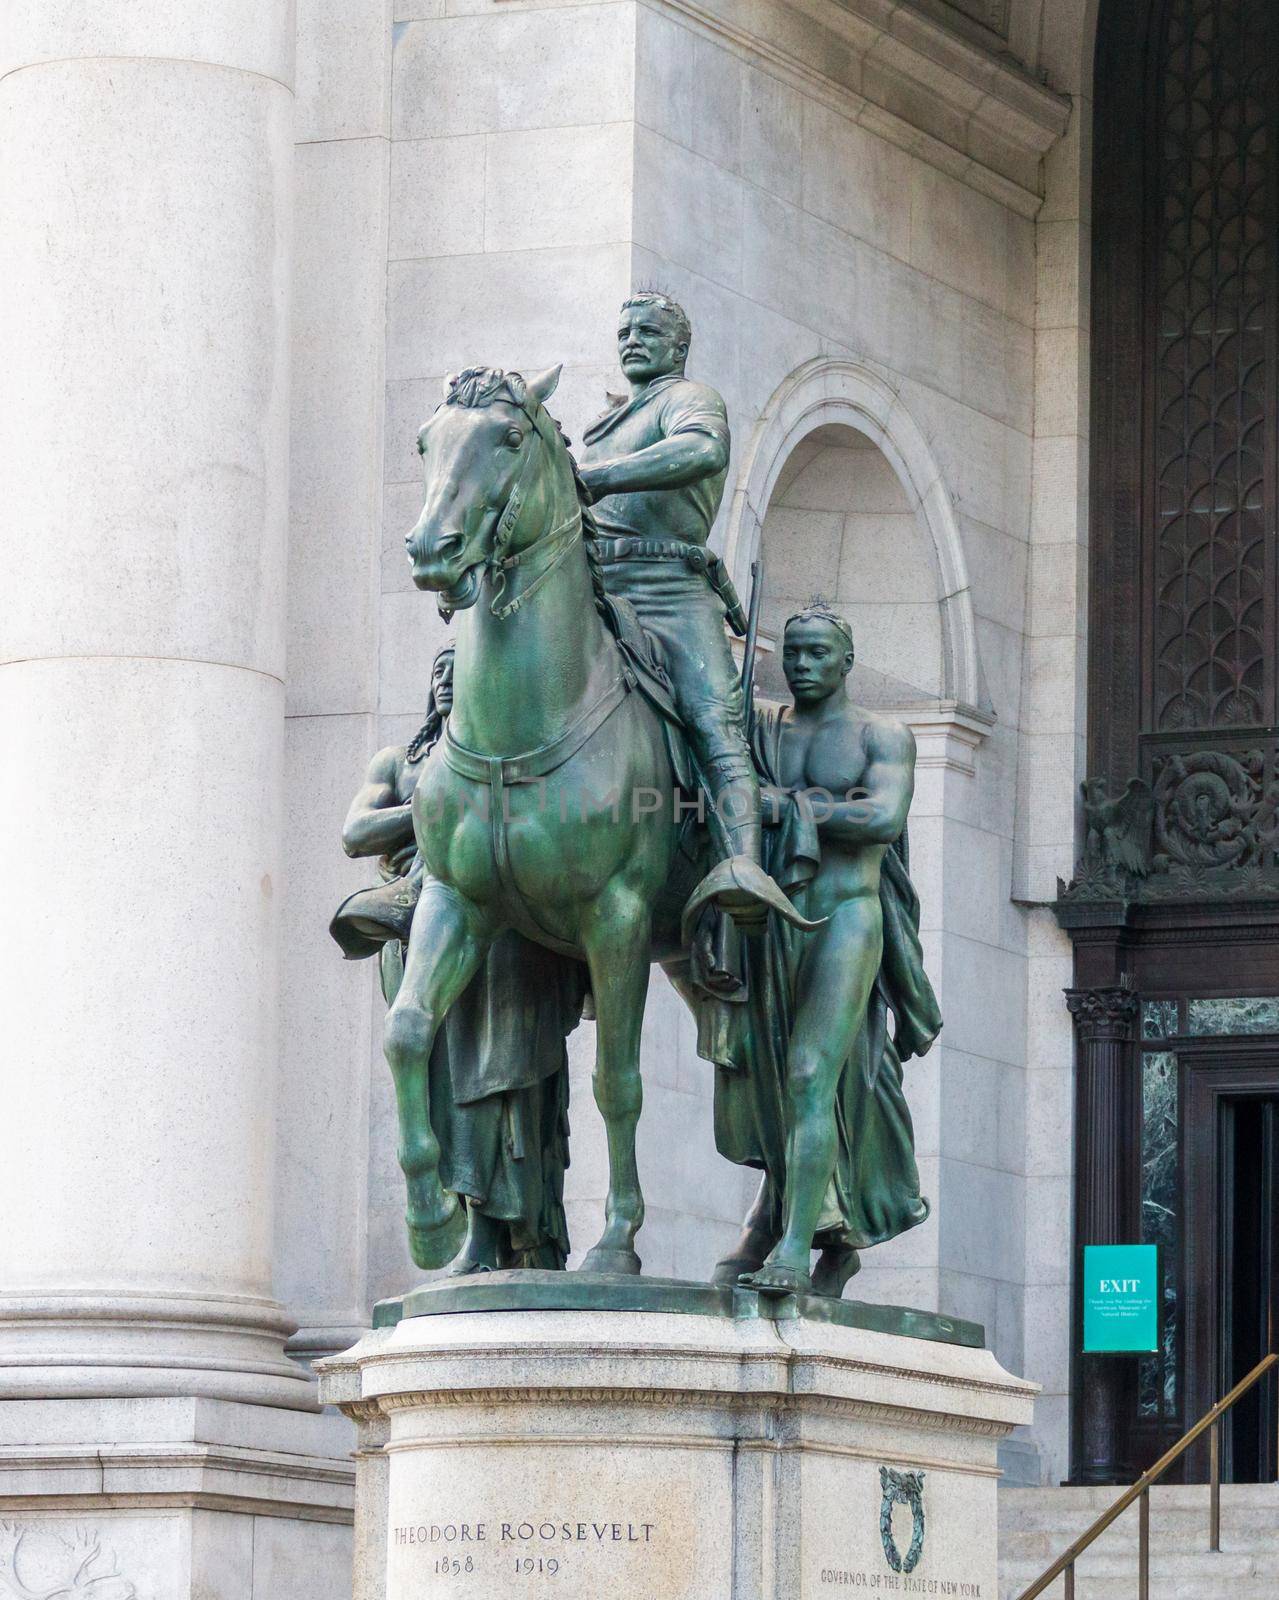 Theodore Roosevelt equestrian monument at the Museum of Natural History in New York City by Mariakray